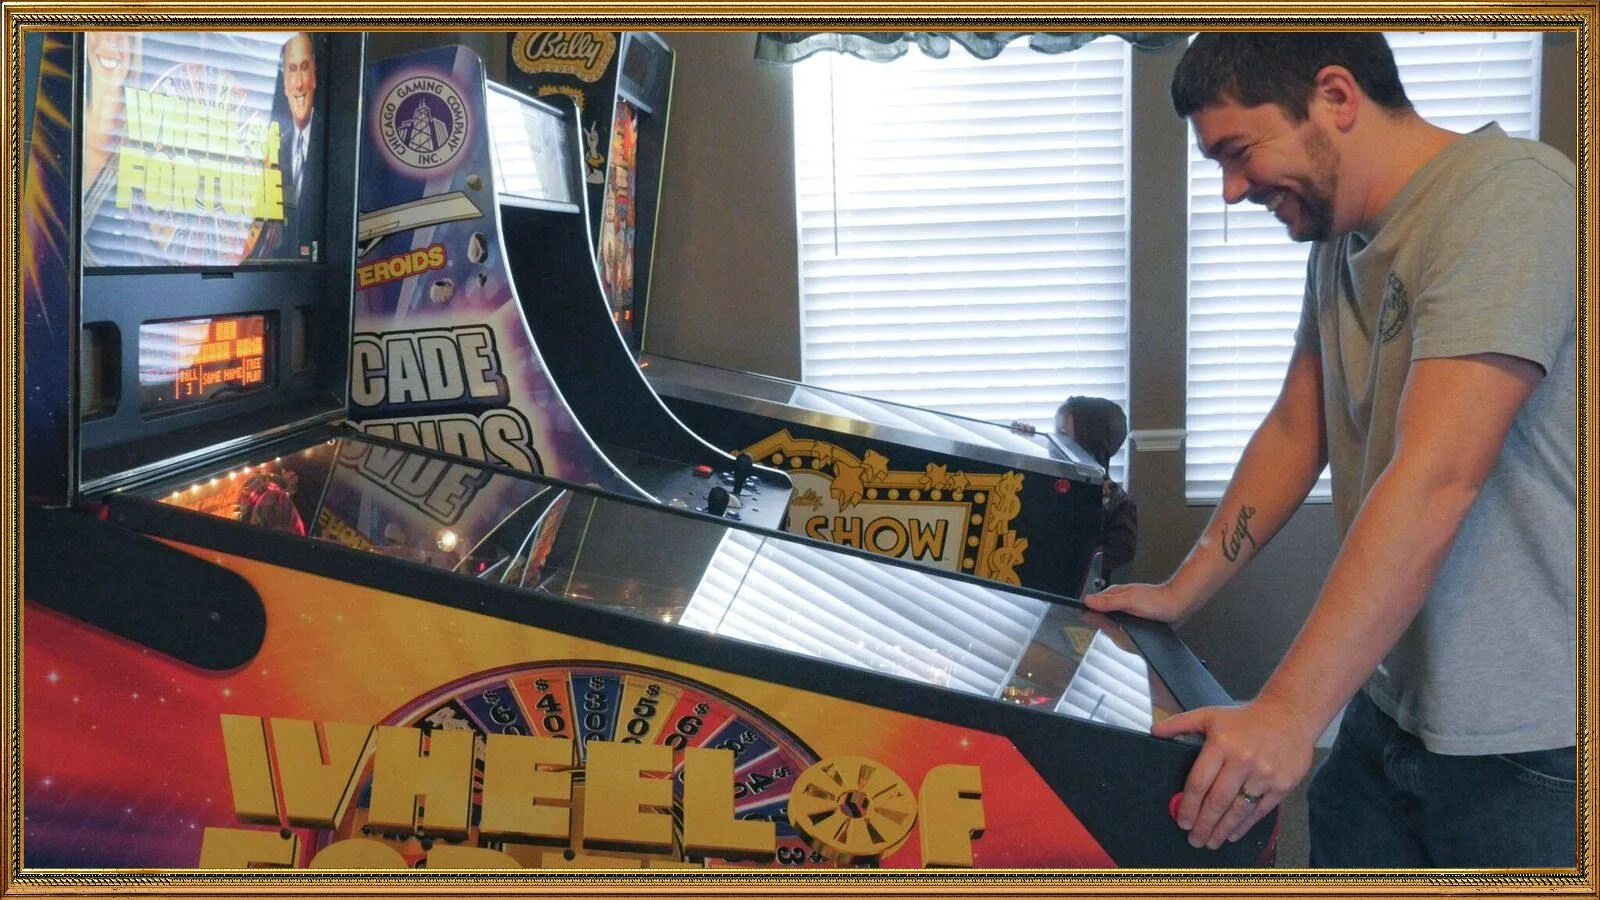 Play video games at The Great Escape Lakeside vacation rental home's arcade